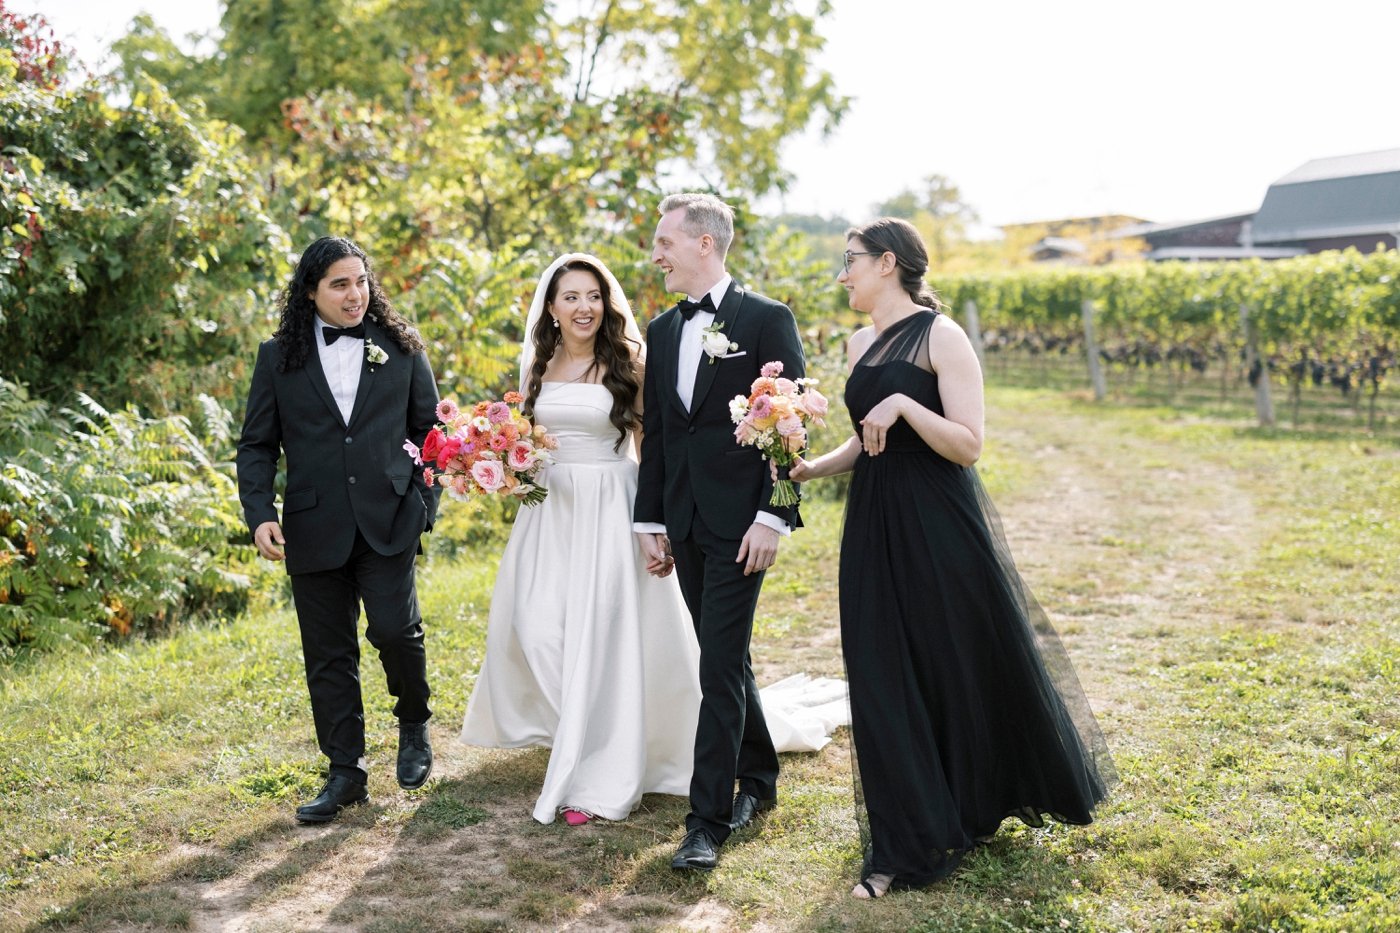 Bridal party portraits at Cave Spring Vineyard in Beamsville, ON